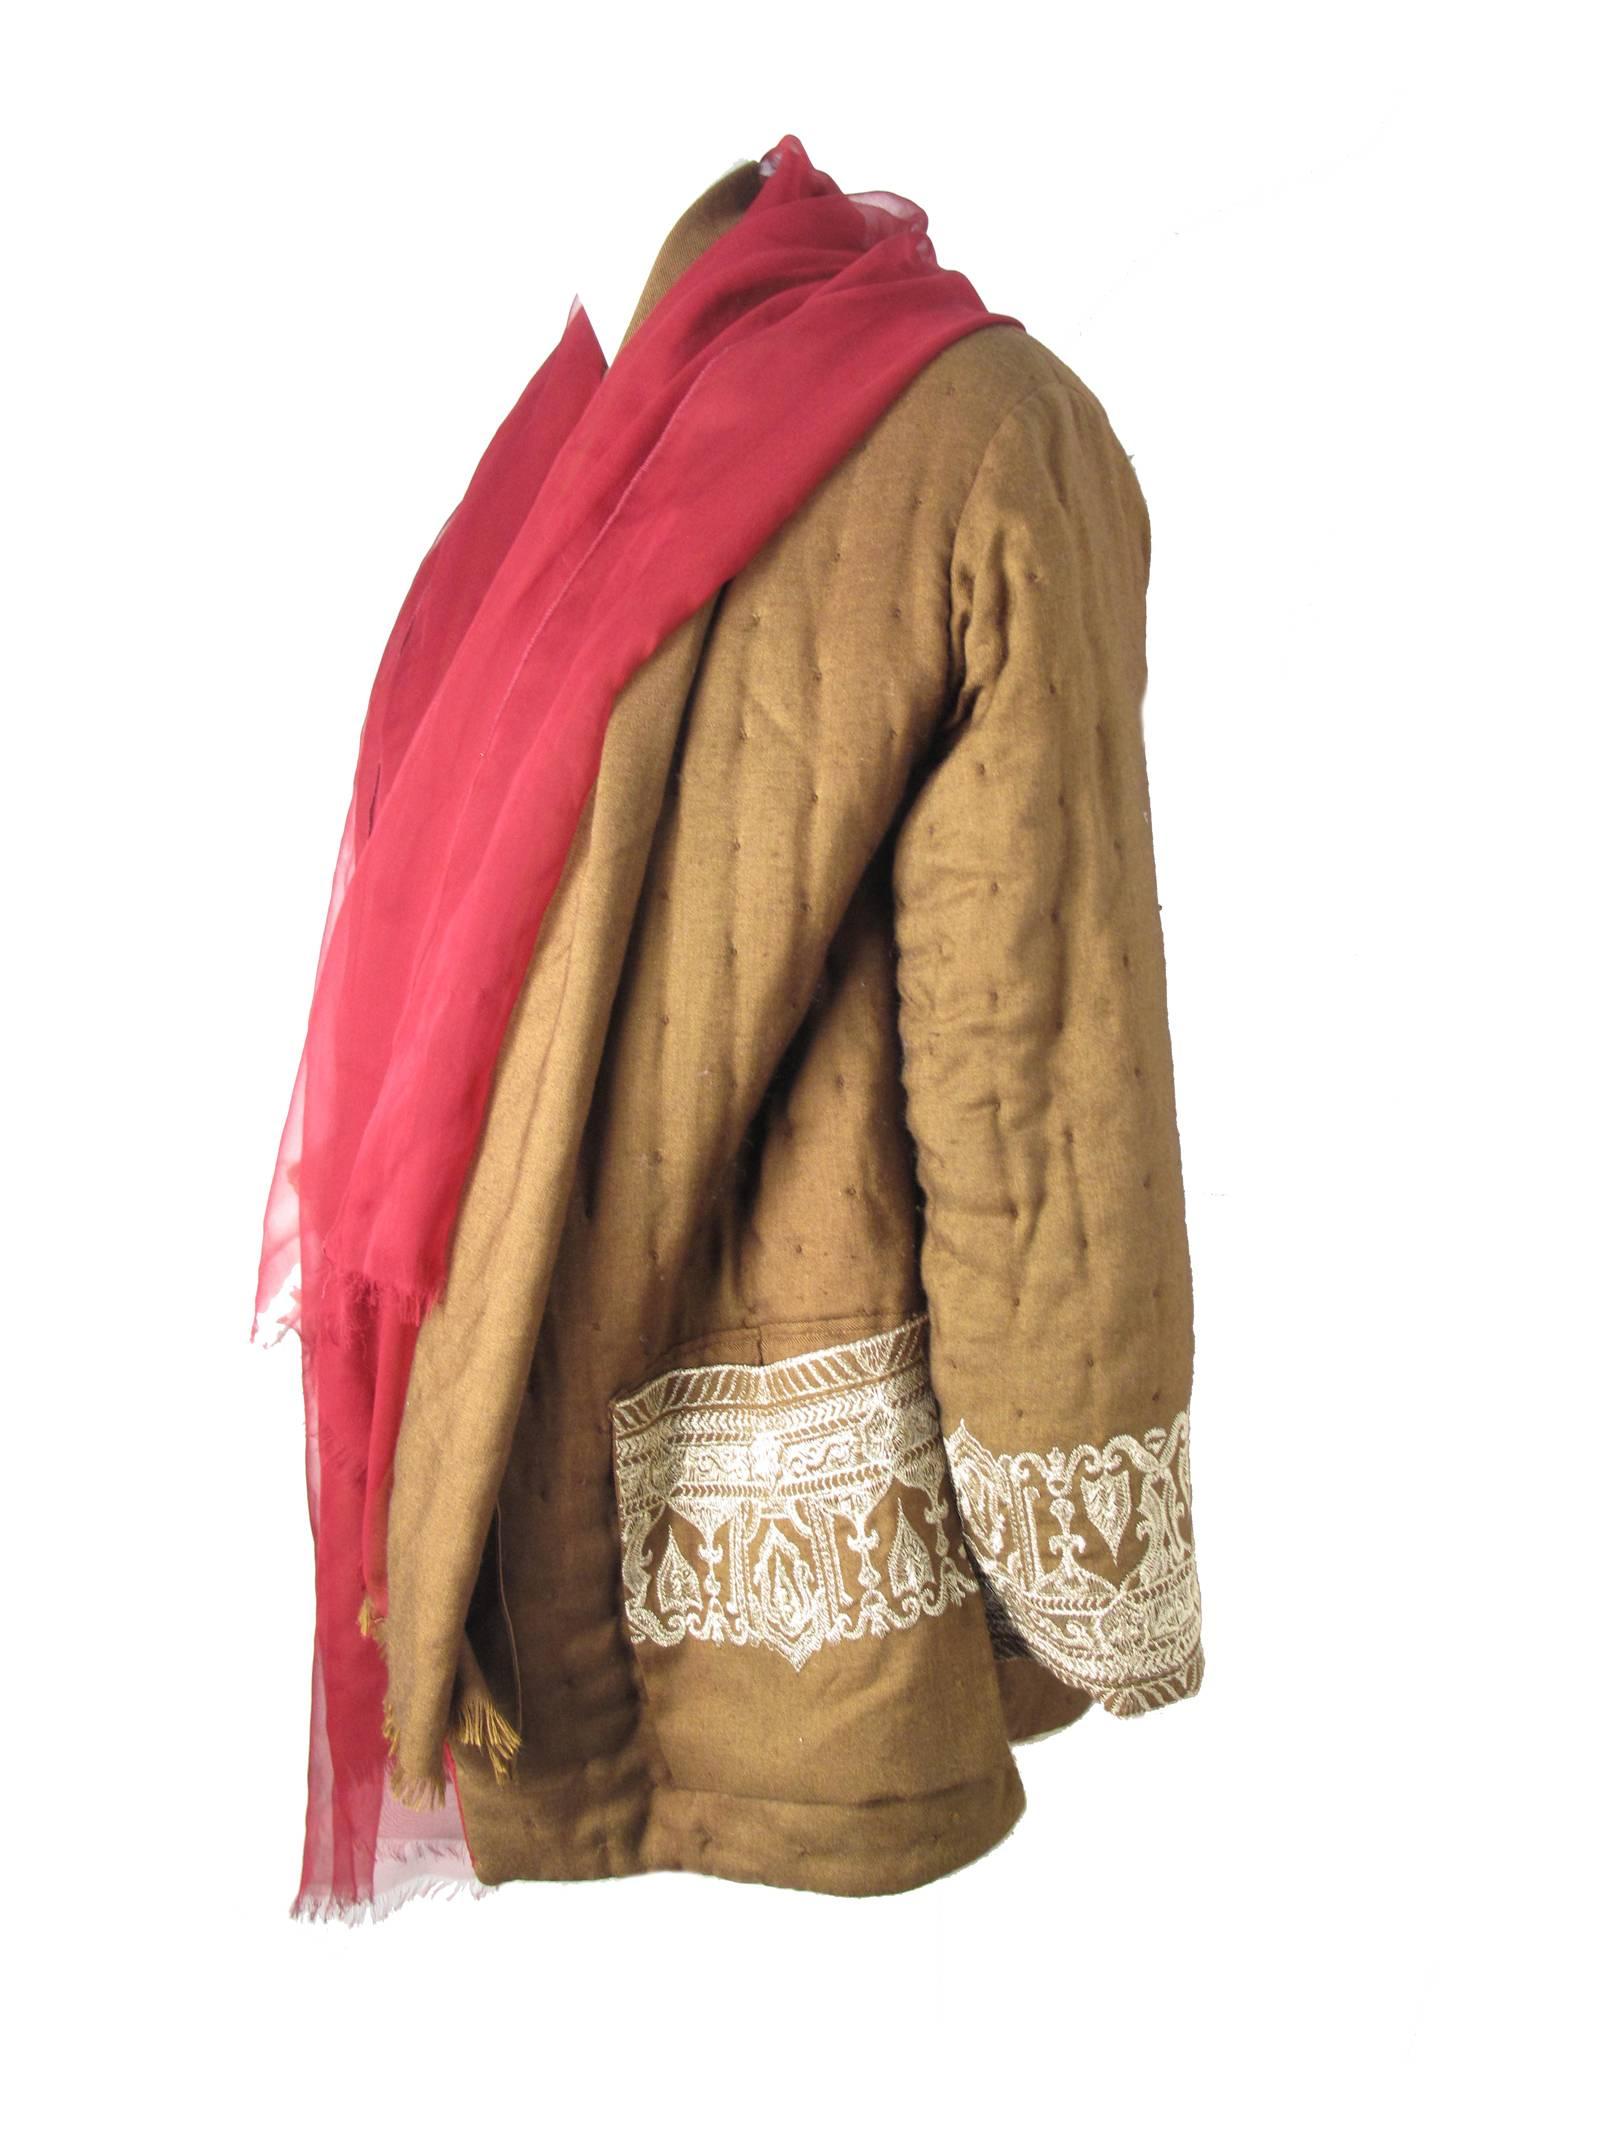 1990s Gianfranco Ferre reversible coat with large attached wool and chiffon scarf. Pockets on both sides. Gold embroidery on brown side on pockets and cuffs. 60% silk, 30% poly 10% cashmere. Condition: Very good, a few spots on scarf, and on water